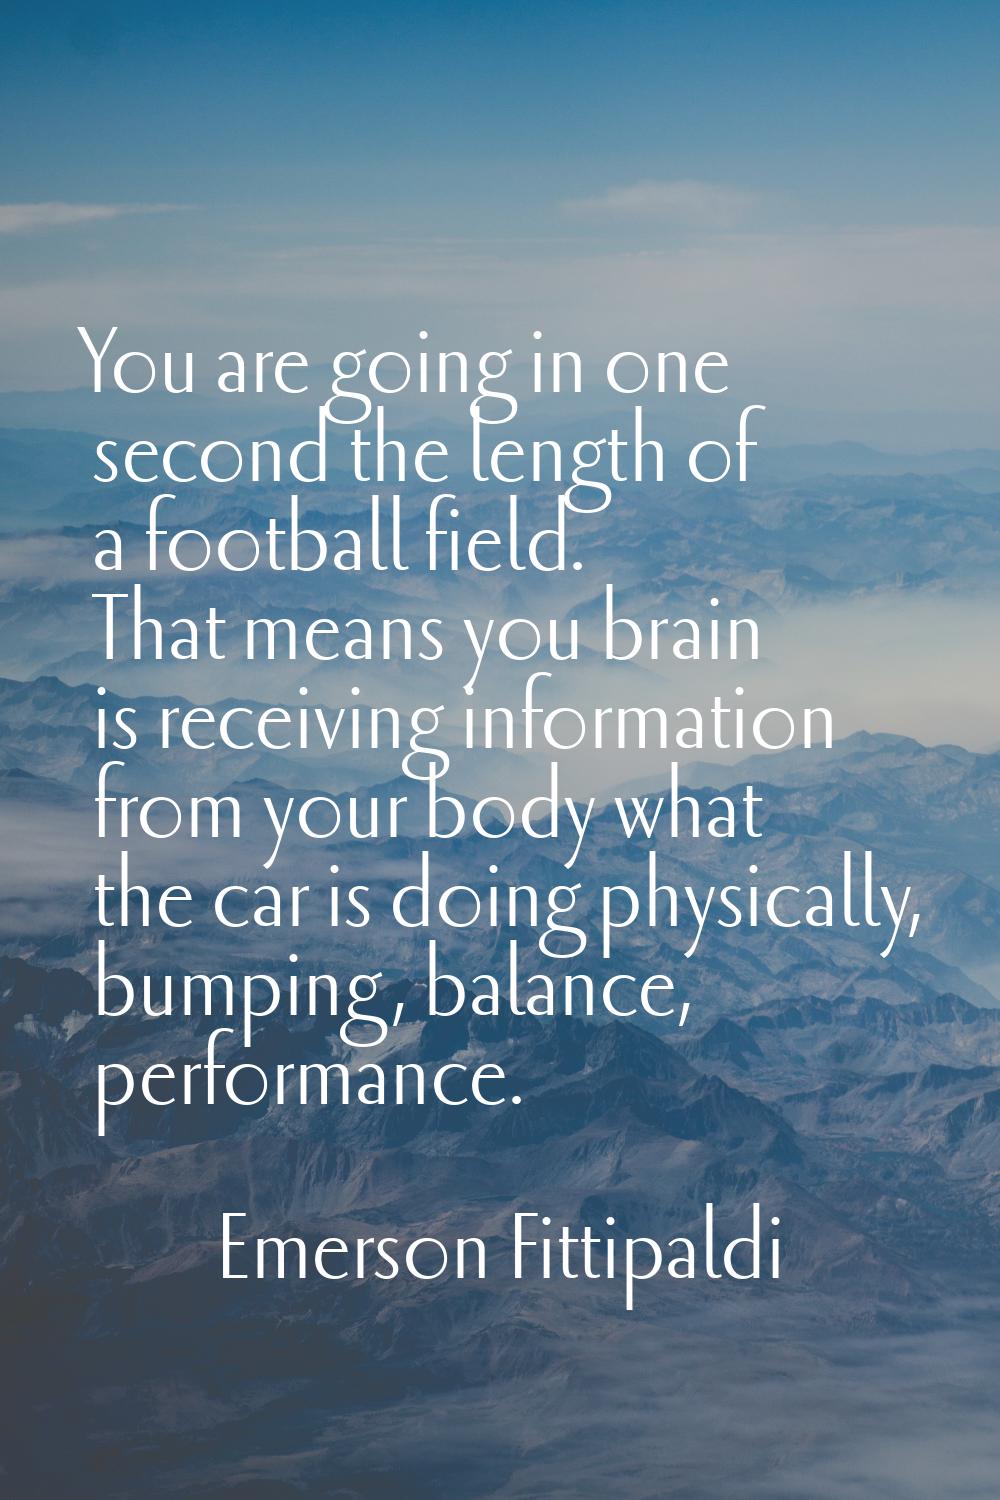 You are going in one second the length of a football field. That means you brain is receiving infor